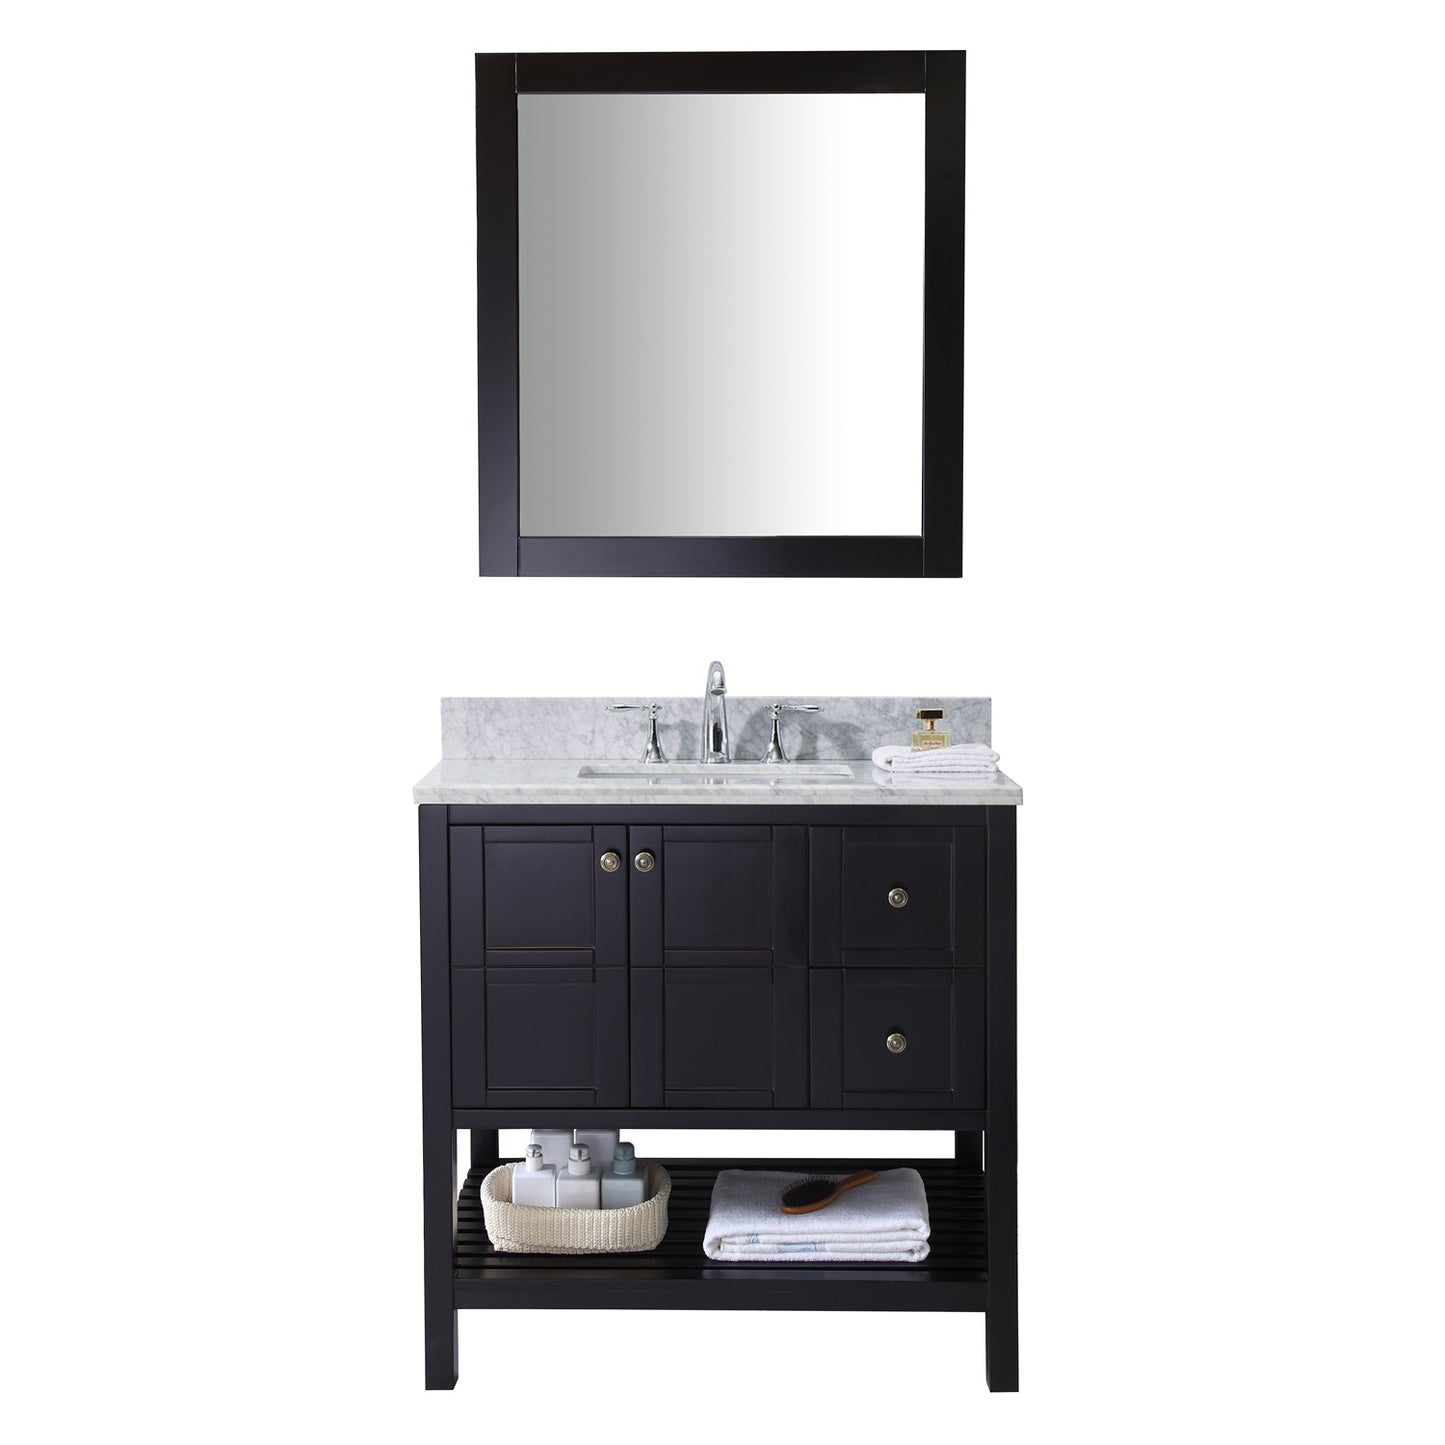 Virtu USA Winterfell 36" Single Bath Vanity in Espresso with Marble Top and Square Sink with Polished Chrome Faucet and Mirror - Luxe Bathroom Vanities Luxury Bathroom Fixtures Bathroom Furniture